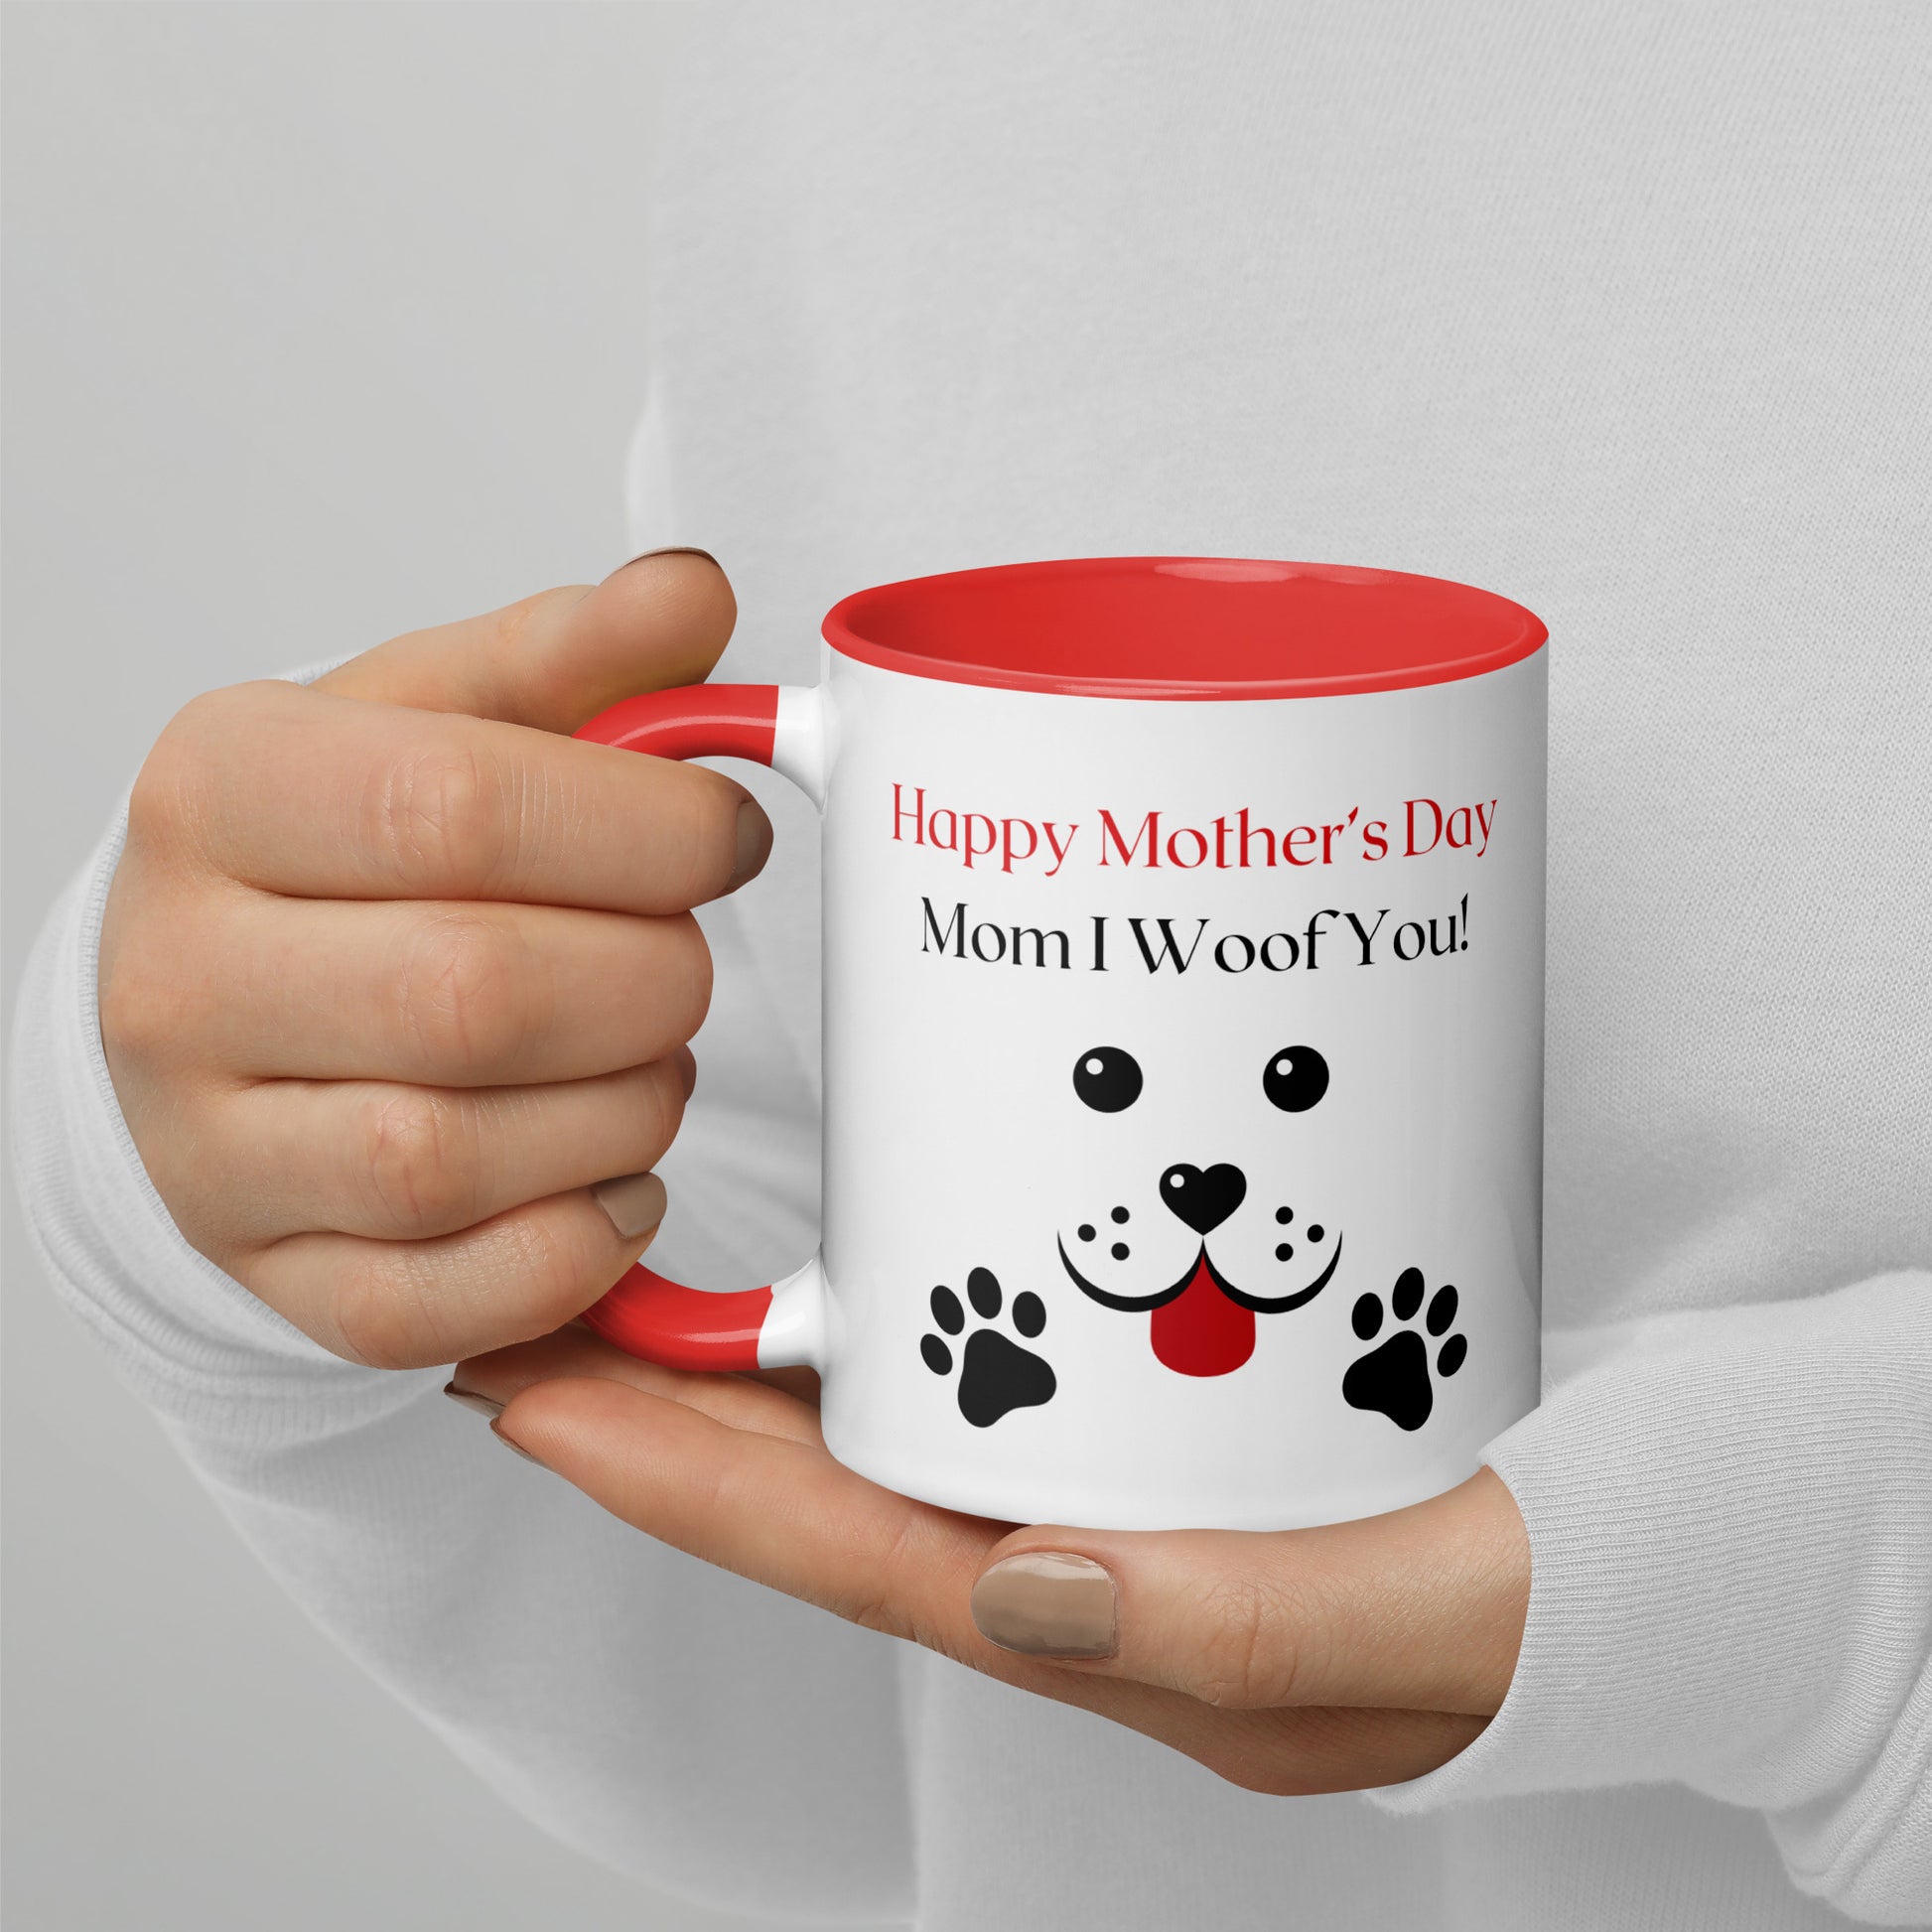 To The World's Best Dog Mom, Mother's Day Gifts